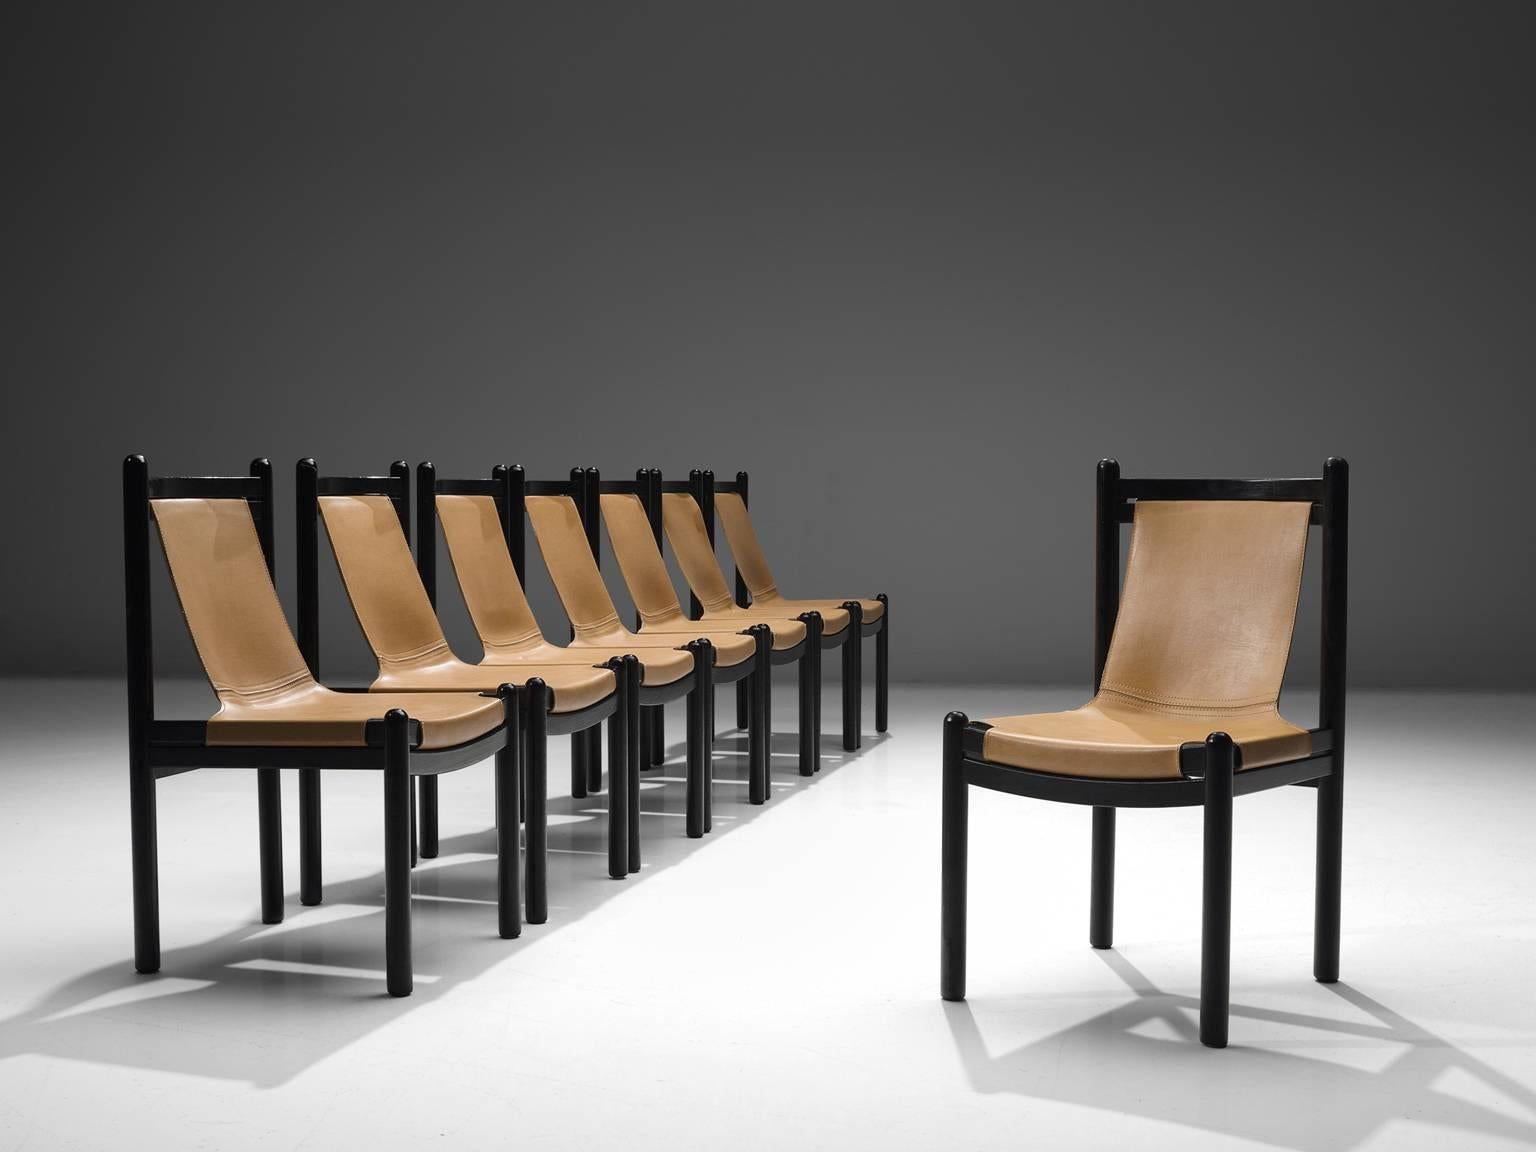 Dining chairs, wood and leather, Finland, 1950s.

These robust chairs feature a geometric, sturdy frame. The joints are all very visible, which enhances the design of these Finnish chairs and shows traits of the design of Ilmari Tapiovaara. The